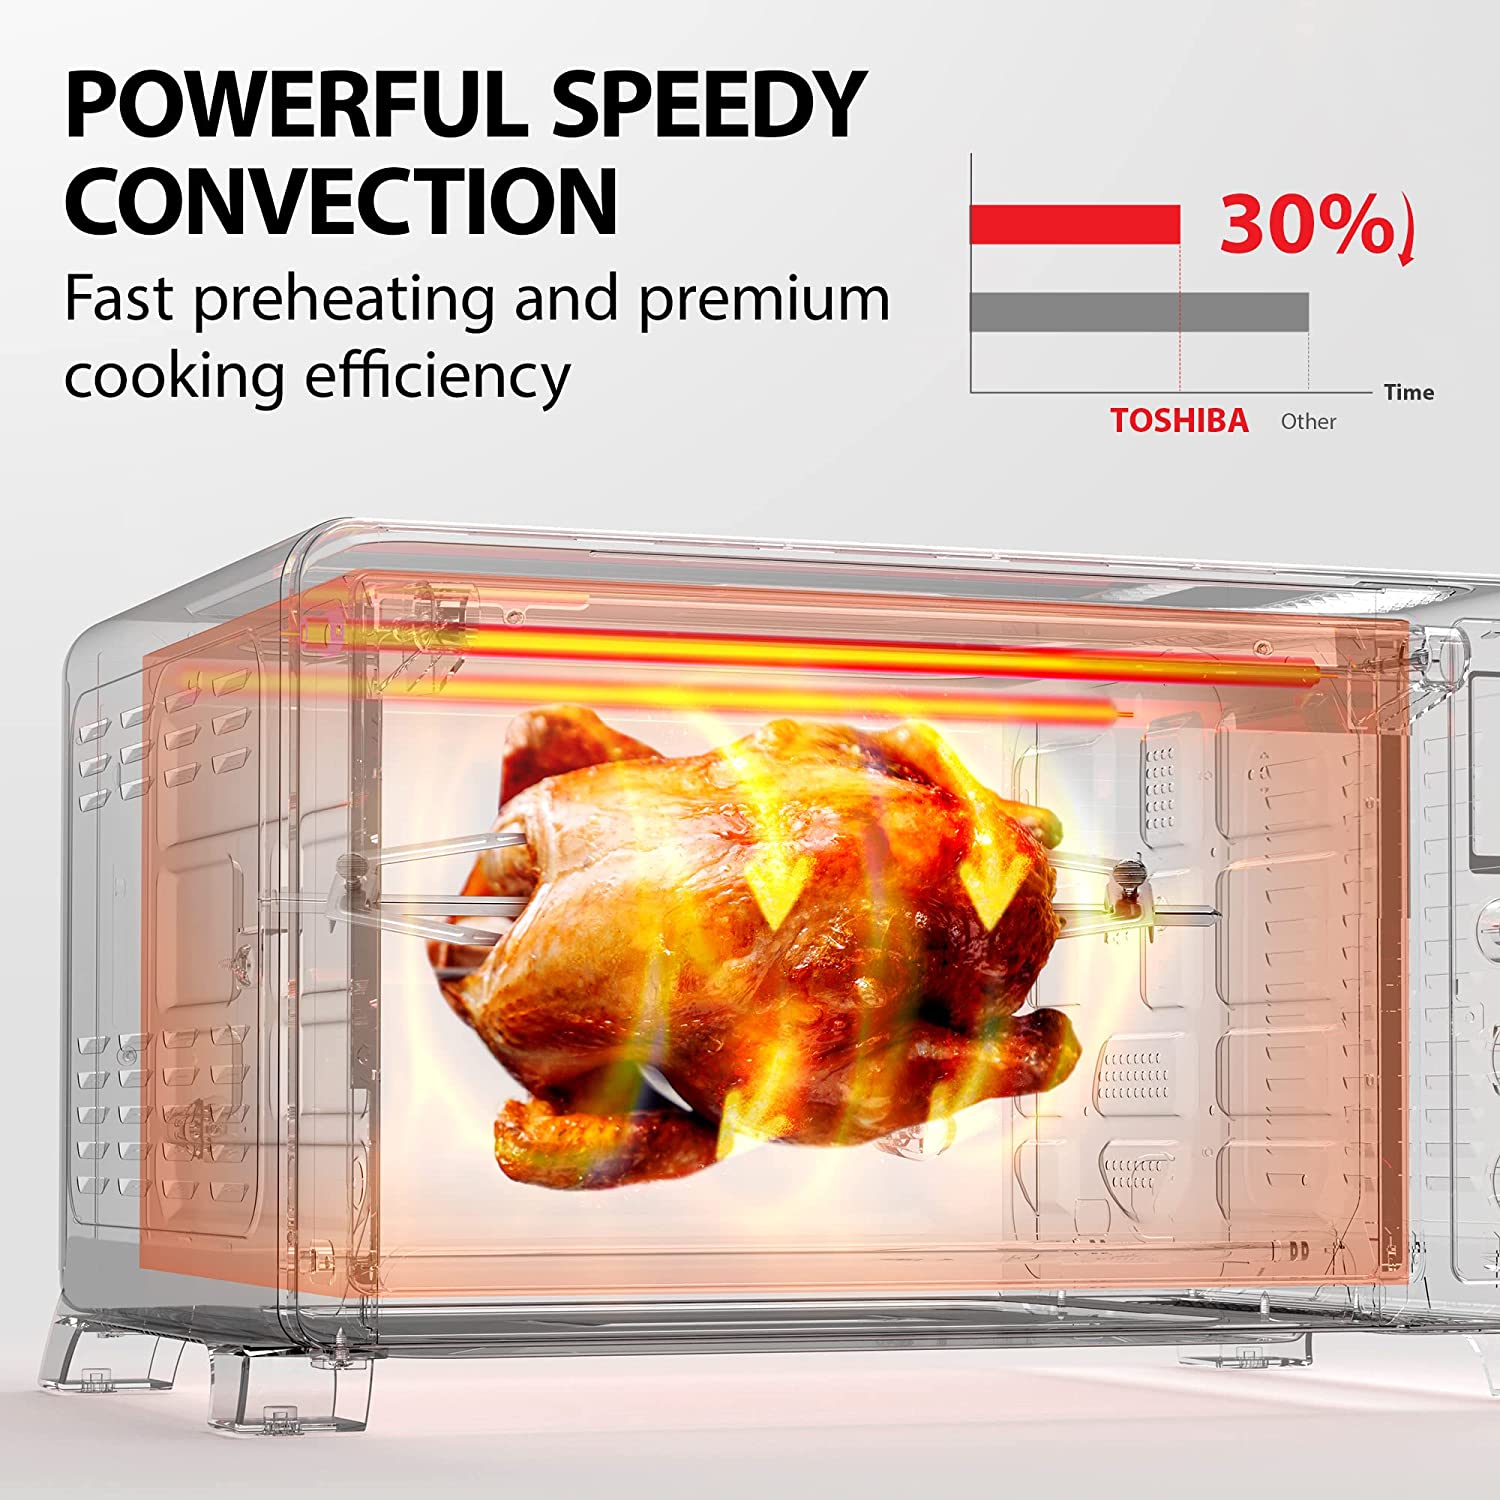 https://discounttoday.net/wp-content/uploads/2022/10/Toshiba-Speedy-Convection-Toaster-Oven-Countertop-with-Double-Infrared-Heating-10-in-1-with-Toast-Pizza-Rotisserie-Larger-6-slice-Capacity-1700W-Black-Stainless-Steel-Includes-6-Accessories3.jpg